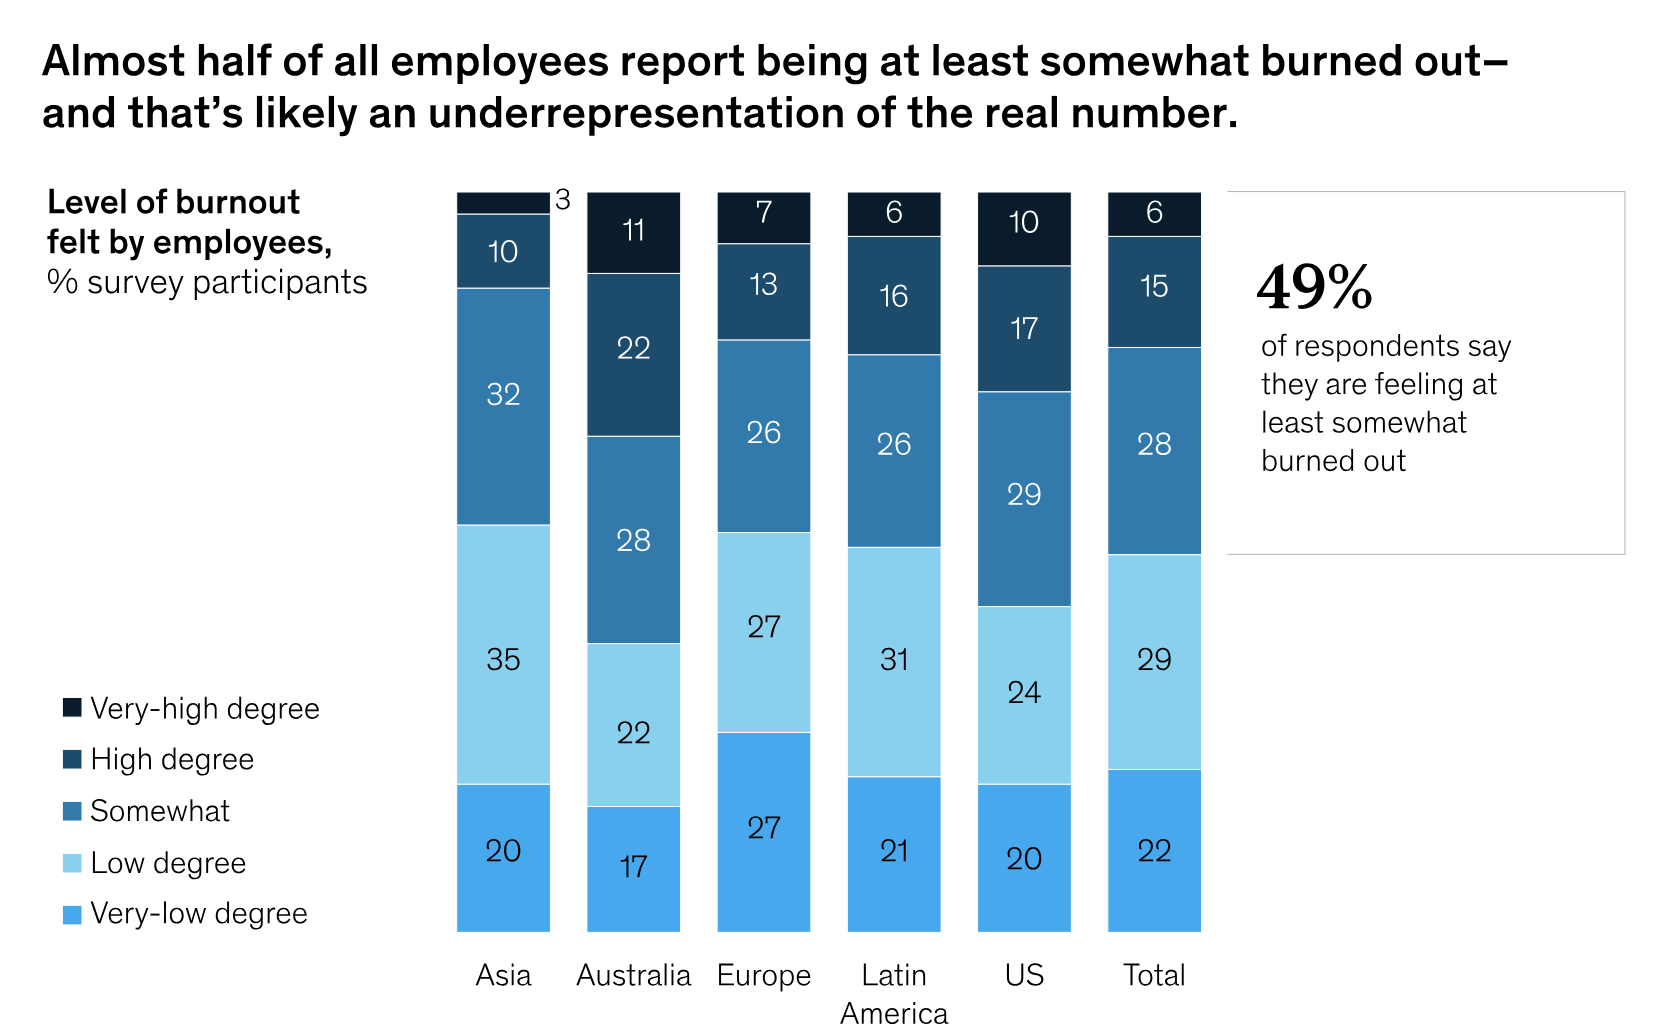 A bar chart showing the level of burnout felt by employees in Asia, Australia, Europe, Latin America and the US